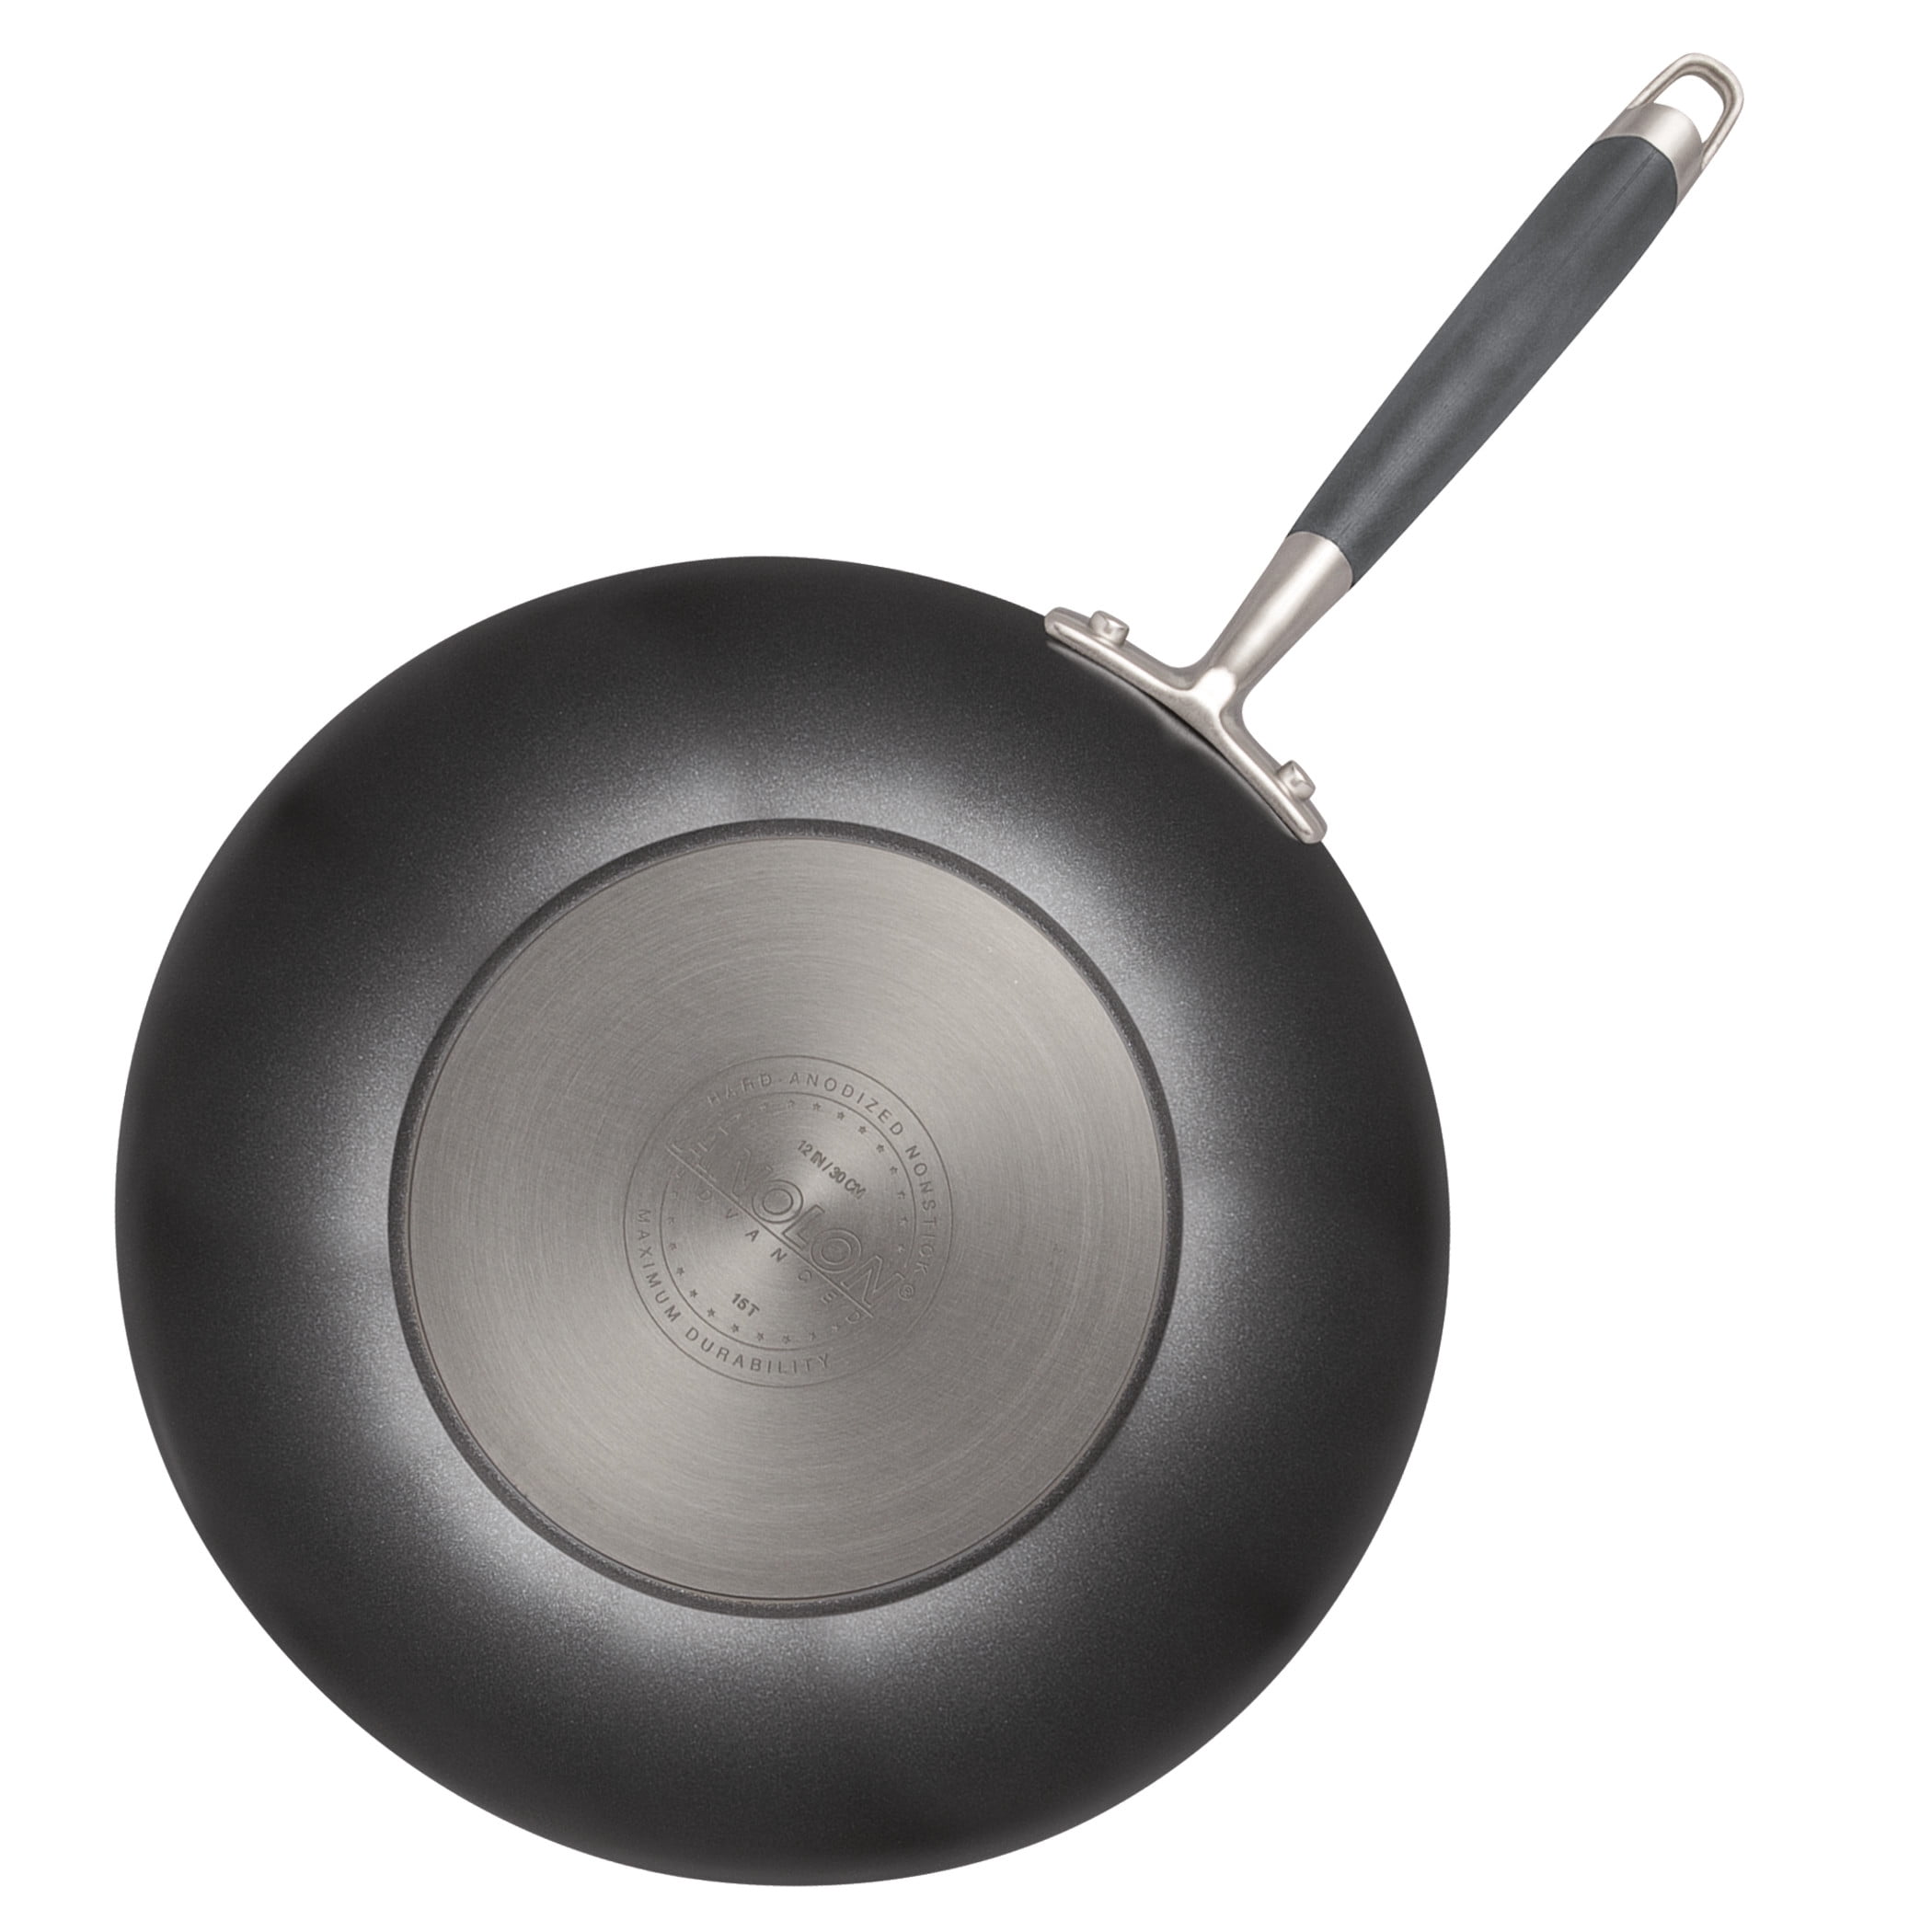  Mueller 12-Inch Fry Pan, Heavy Duty Non-Stick German Stone  Coating Cookware, Aluminum Body, Even Heat Distribution, No PFOA or APEO,  EverCool Stainless Steel Handle, Black: Home & Kitchen